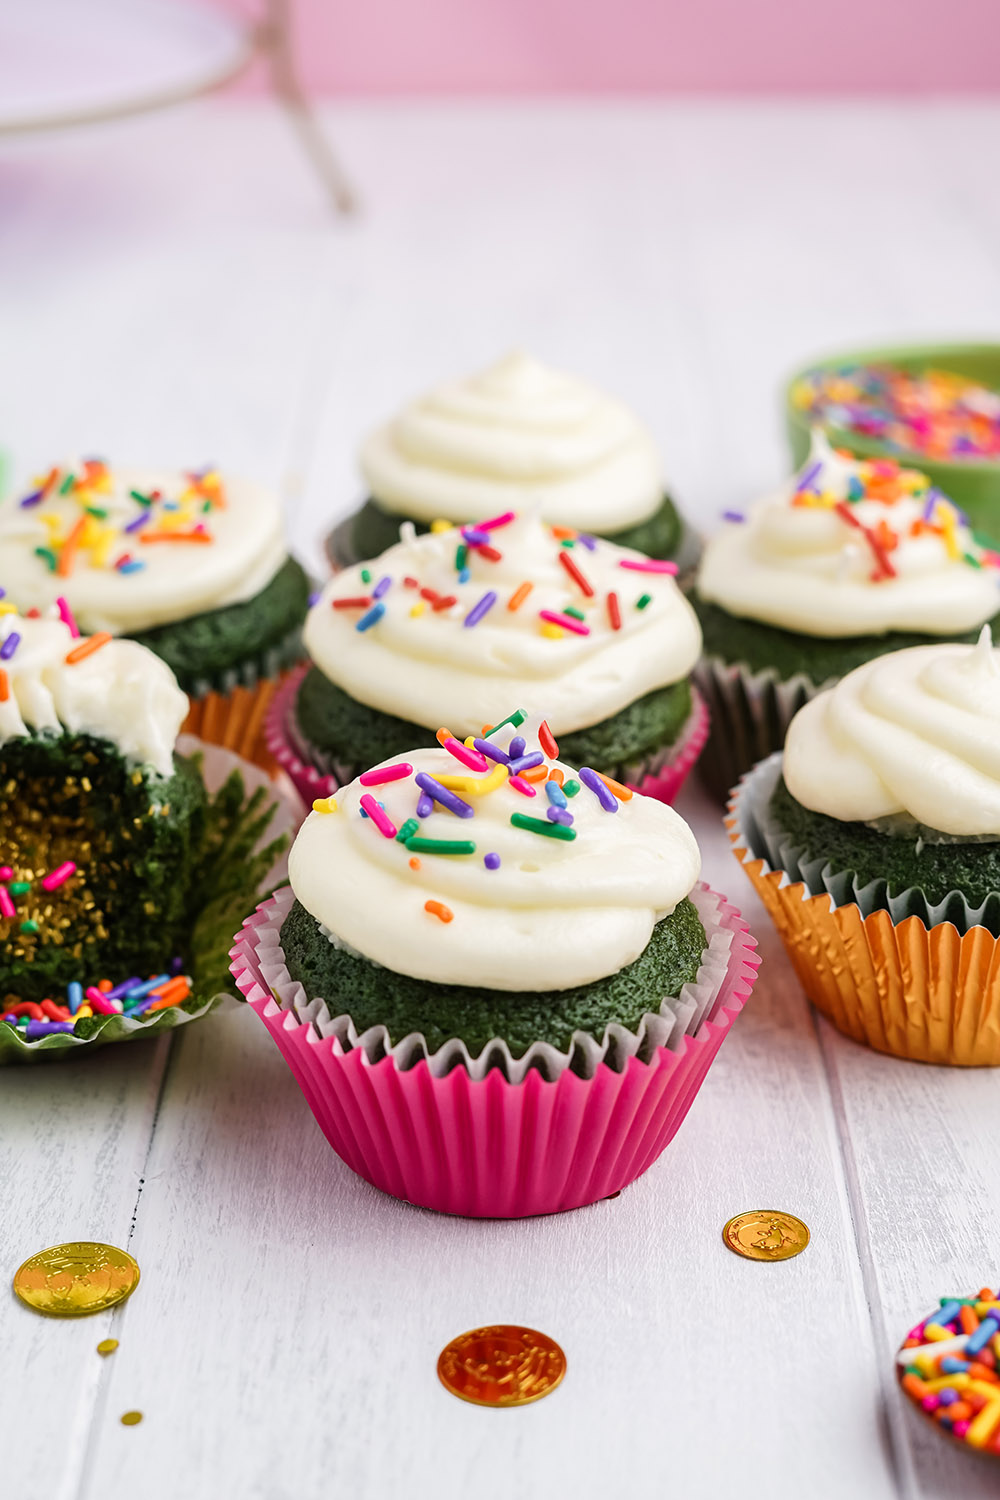 Green cupcakes with sprinkles.